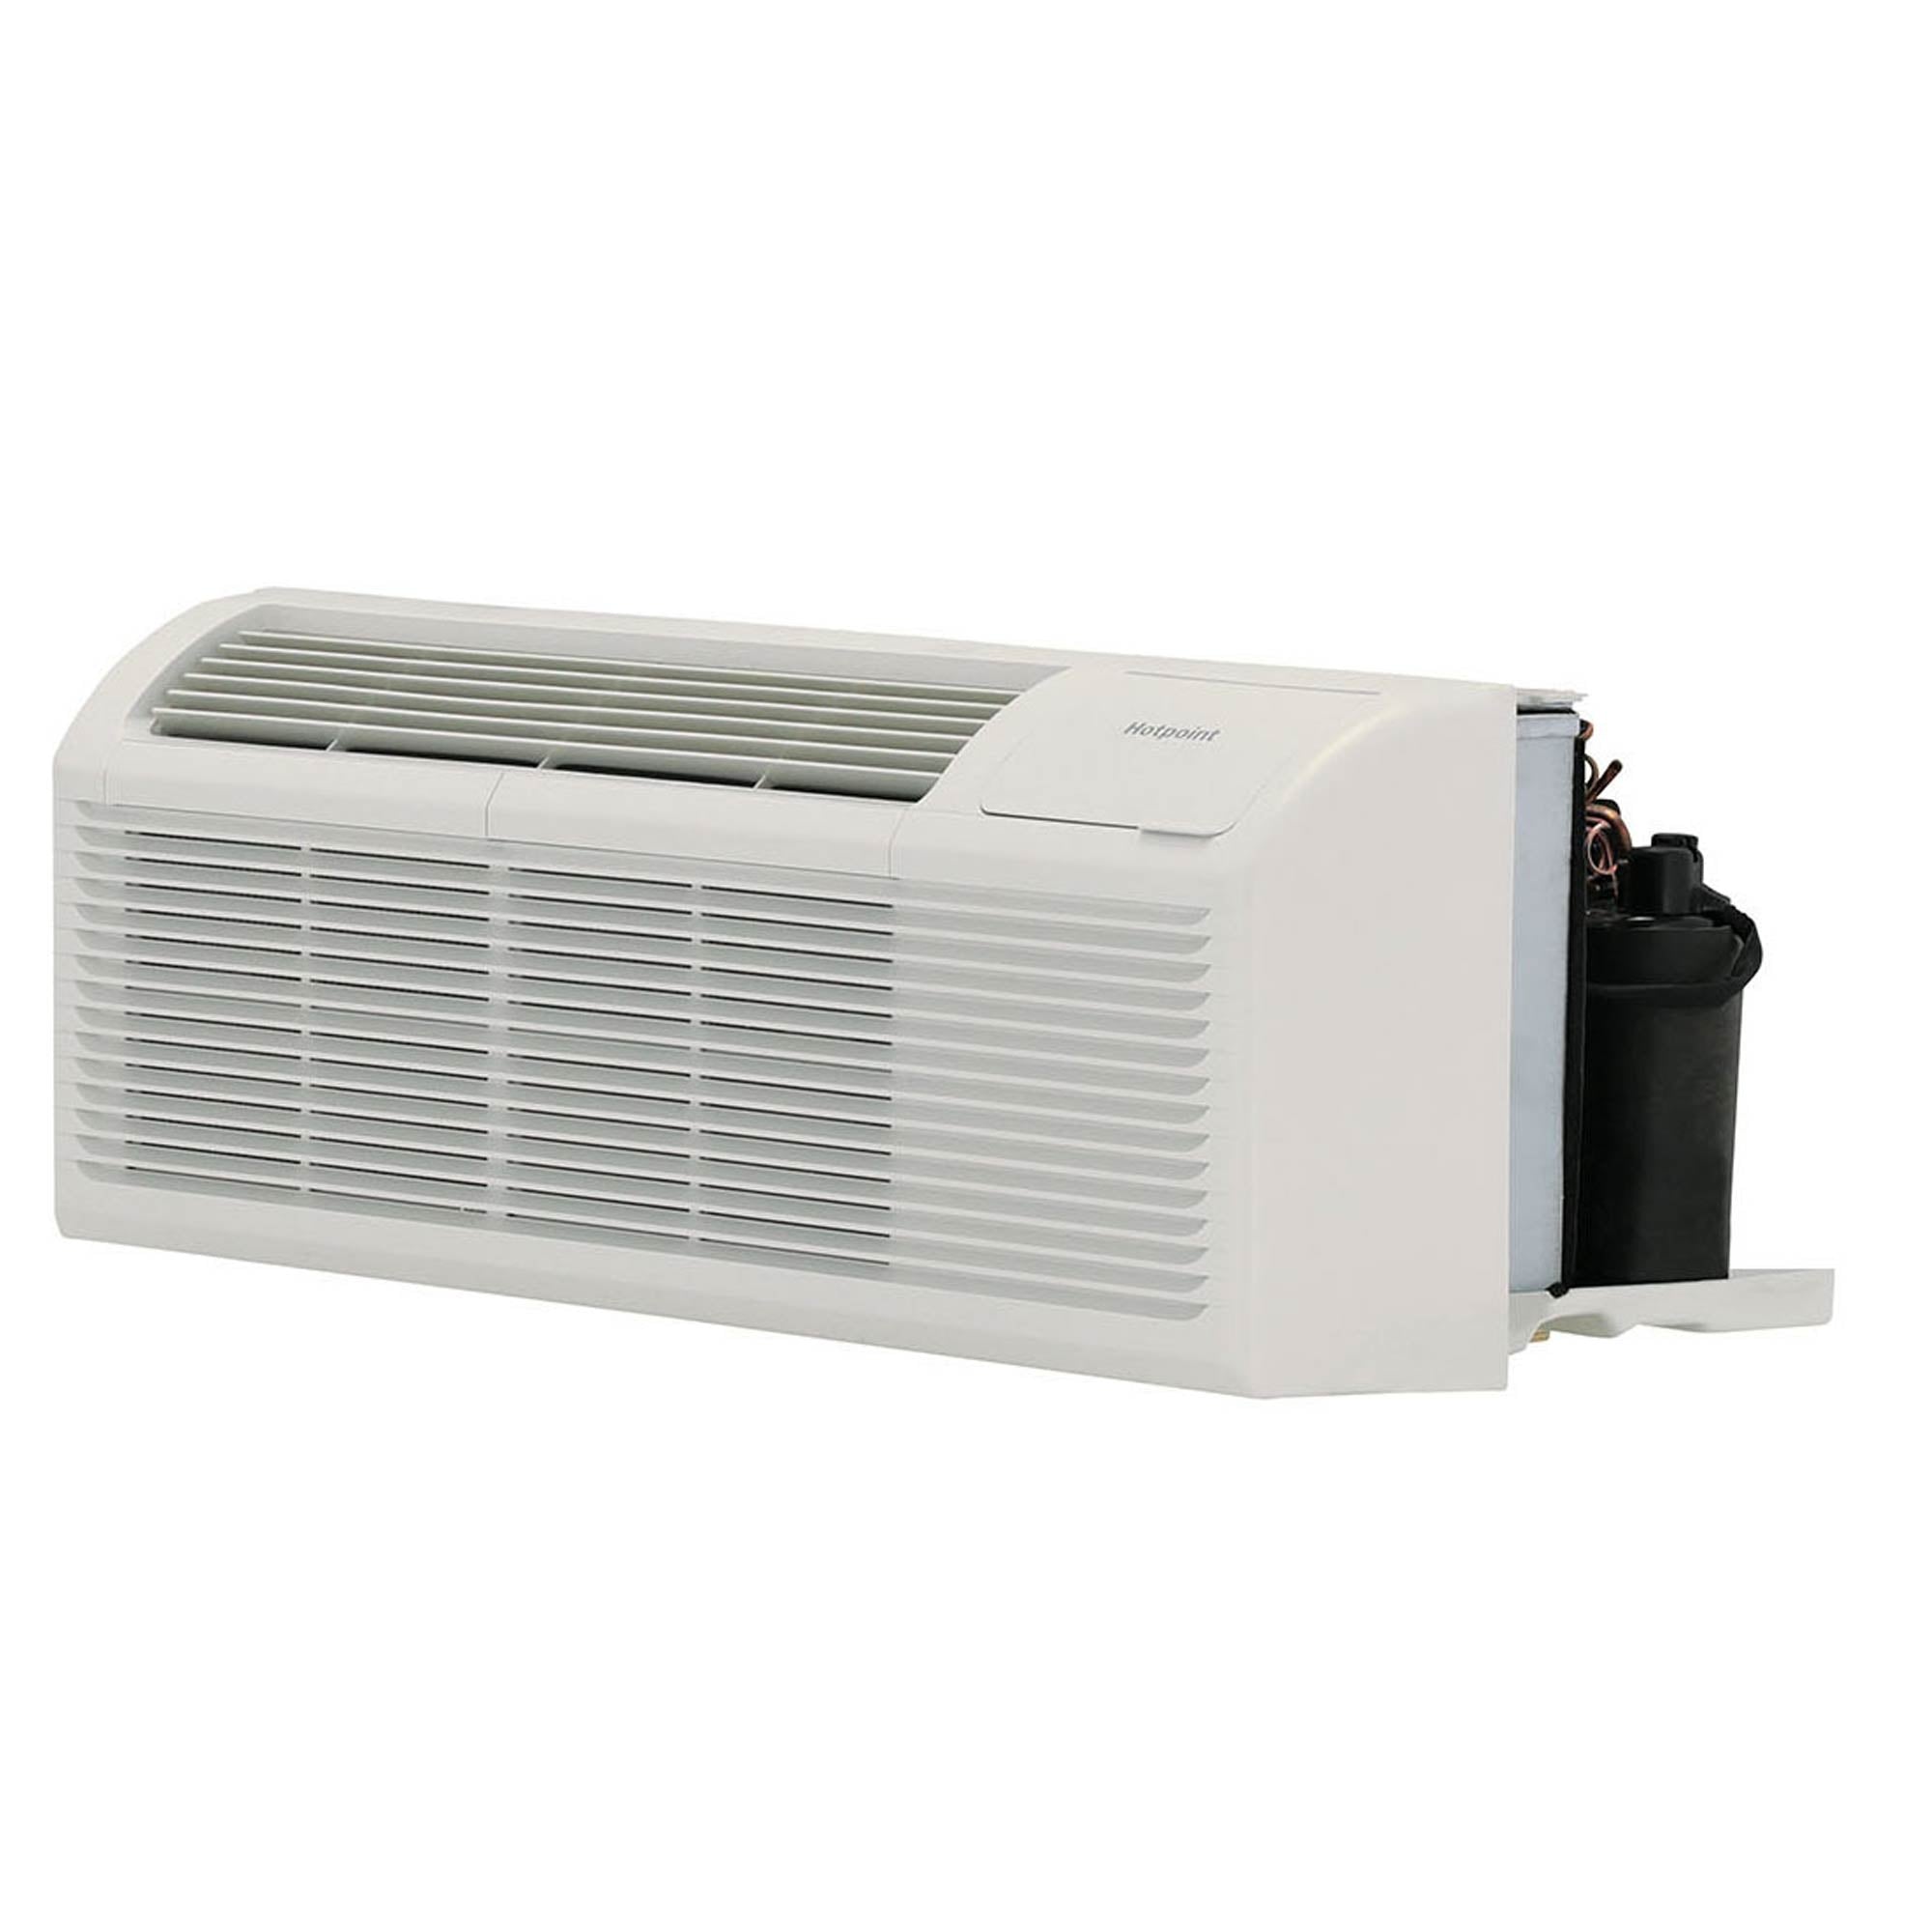 Hotpoint 14,500 BTU PTAC Heat Pump with 3.4 kW Electric Heat Backup